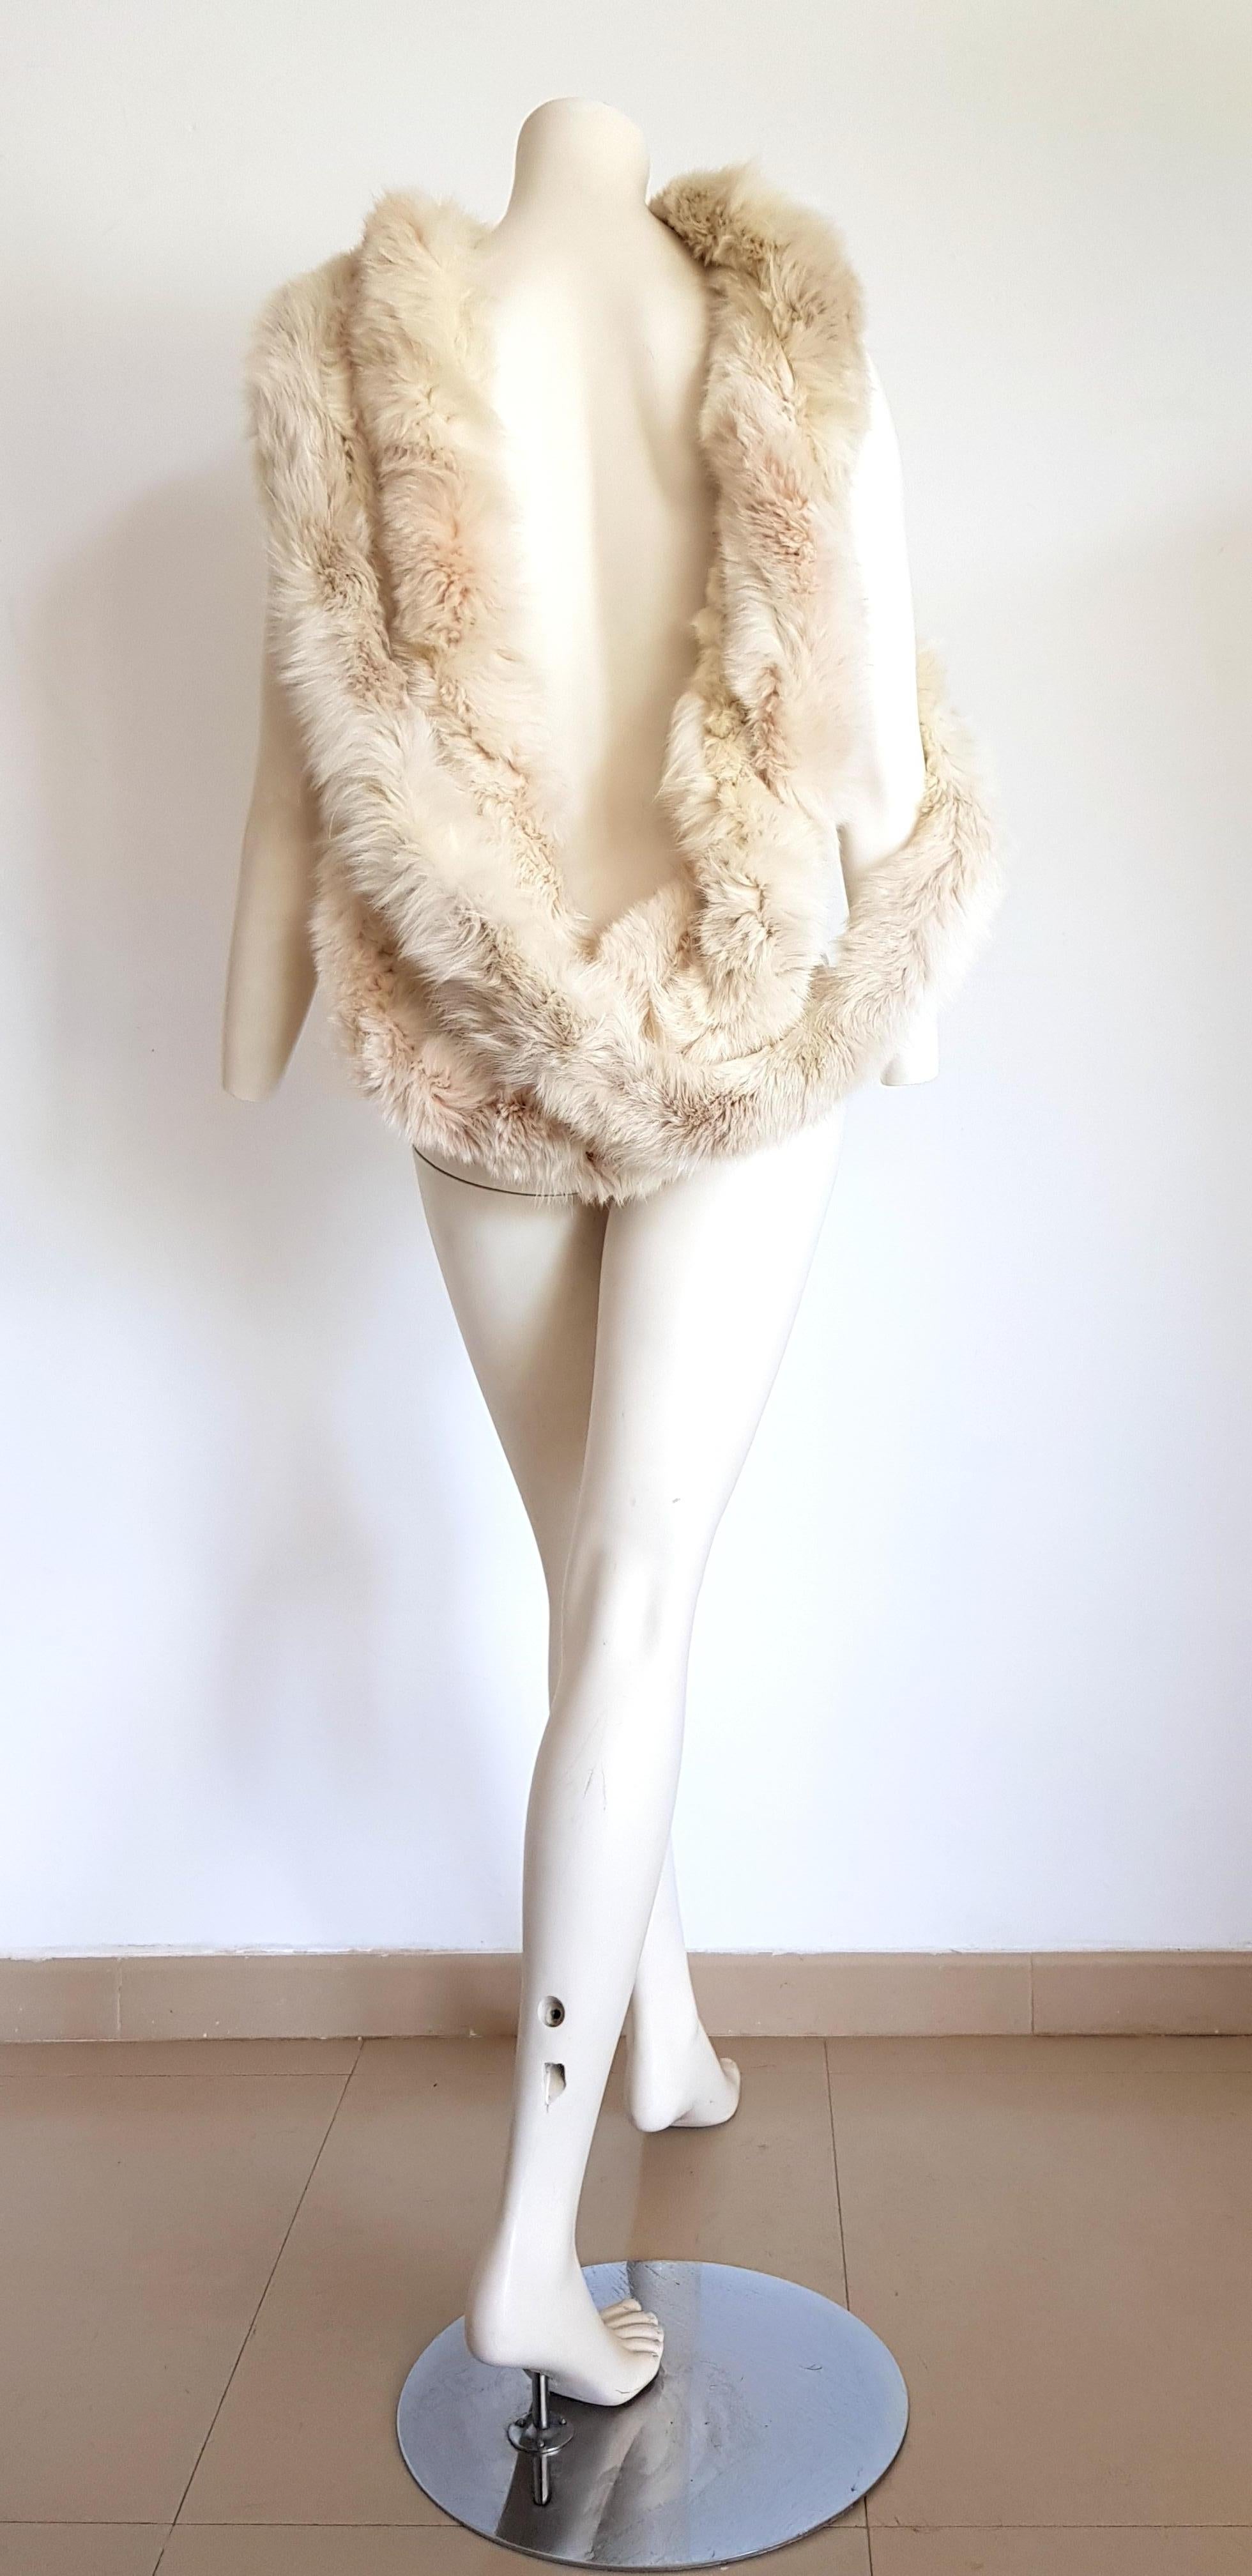 MALO Cream Wild Arctic Silver Fox Round Shape Fur Scarf - Unworn, New.
The cream color in silver fox is very rare and esteemed.

SIZE:
Lenght, or total circunference: 720 cm.
Diameter: 10 cm.
TO CONVERT: cm x 0.39 = inch.
By 